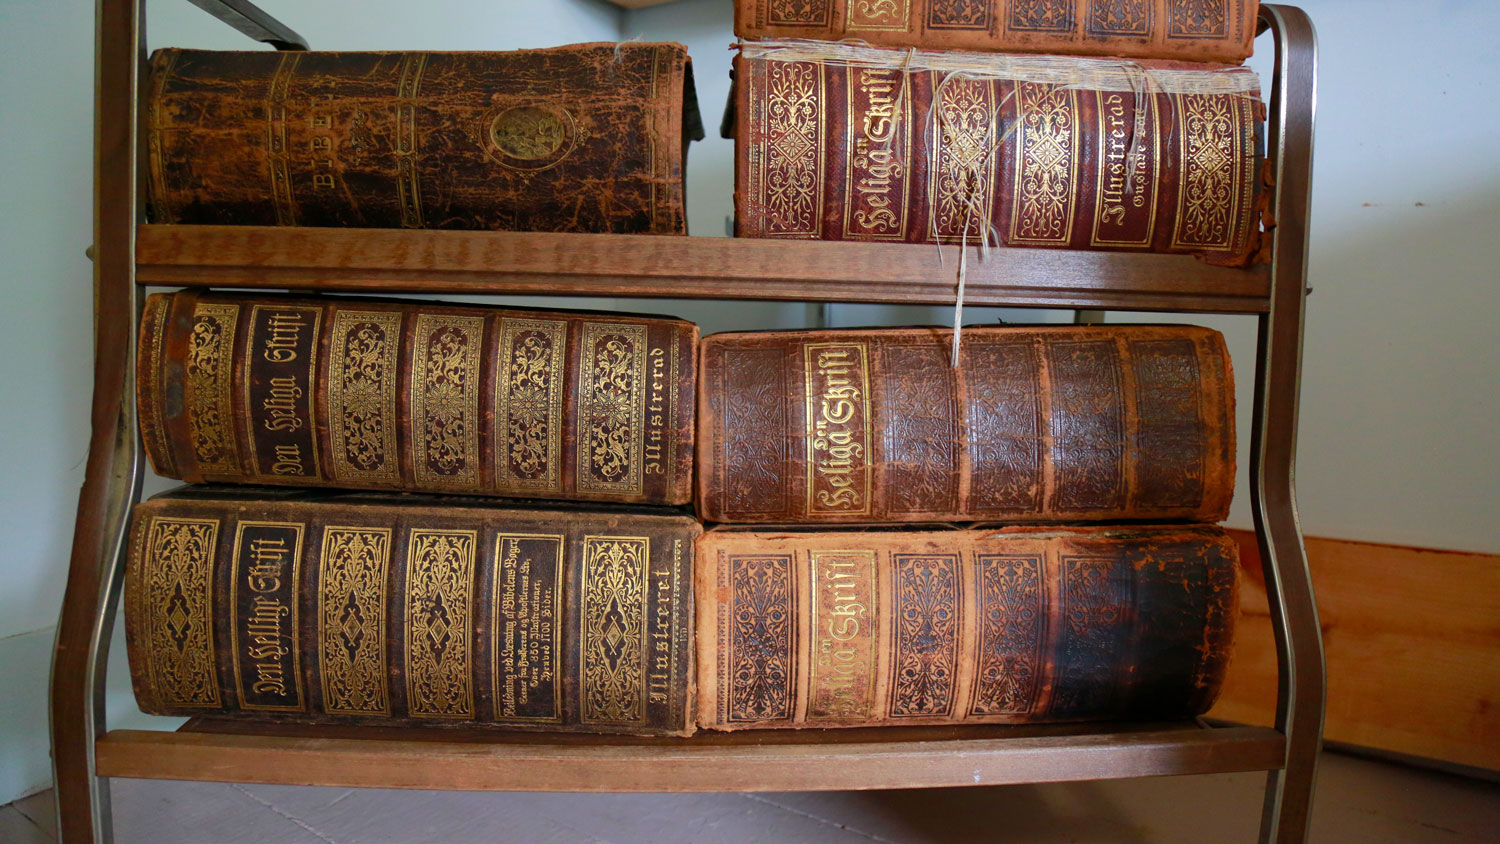 Antique Bibles in the parsonage